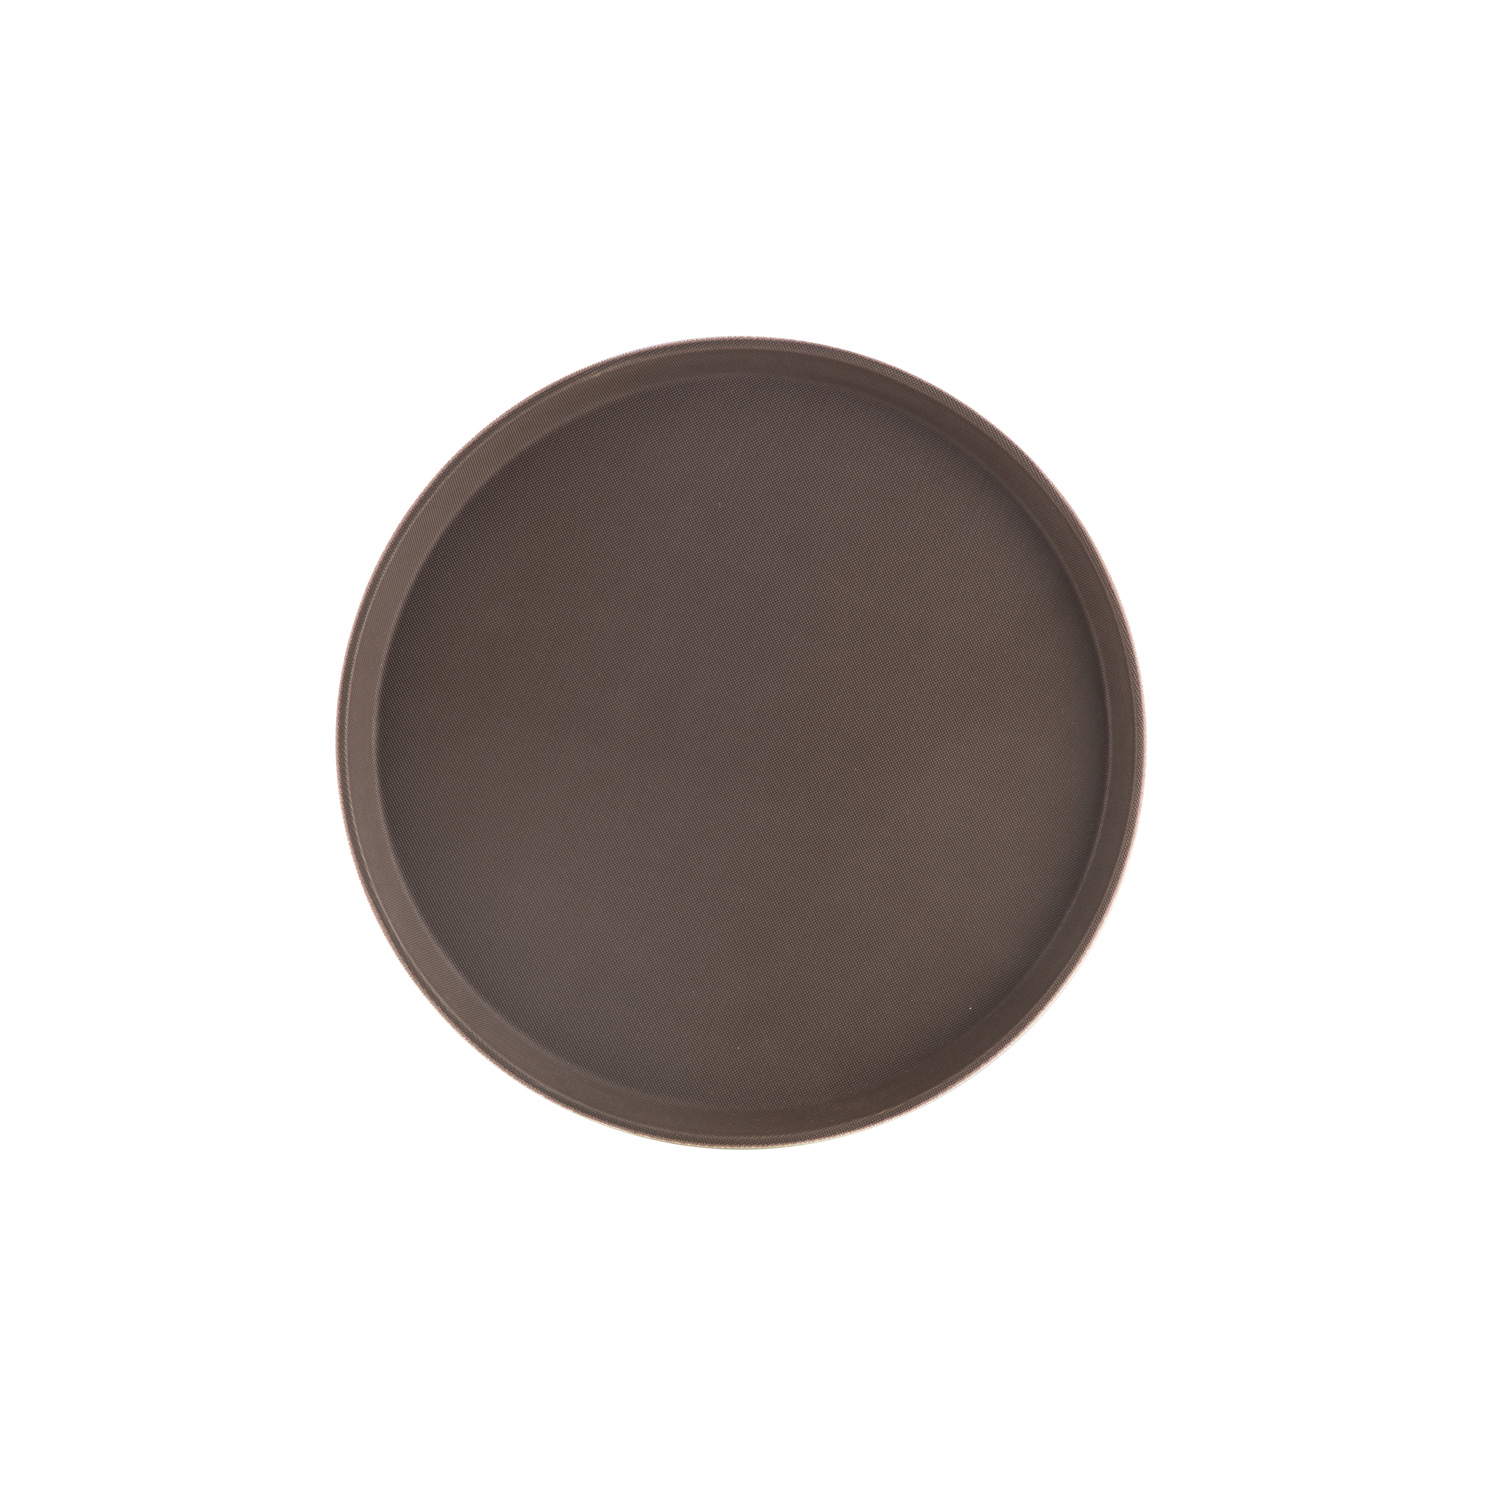 CAC China PDTR-14BN Brown Round Plastic Super Tray 14"Dia